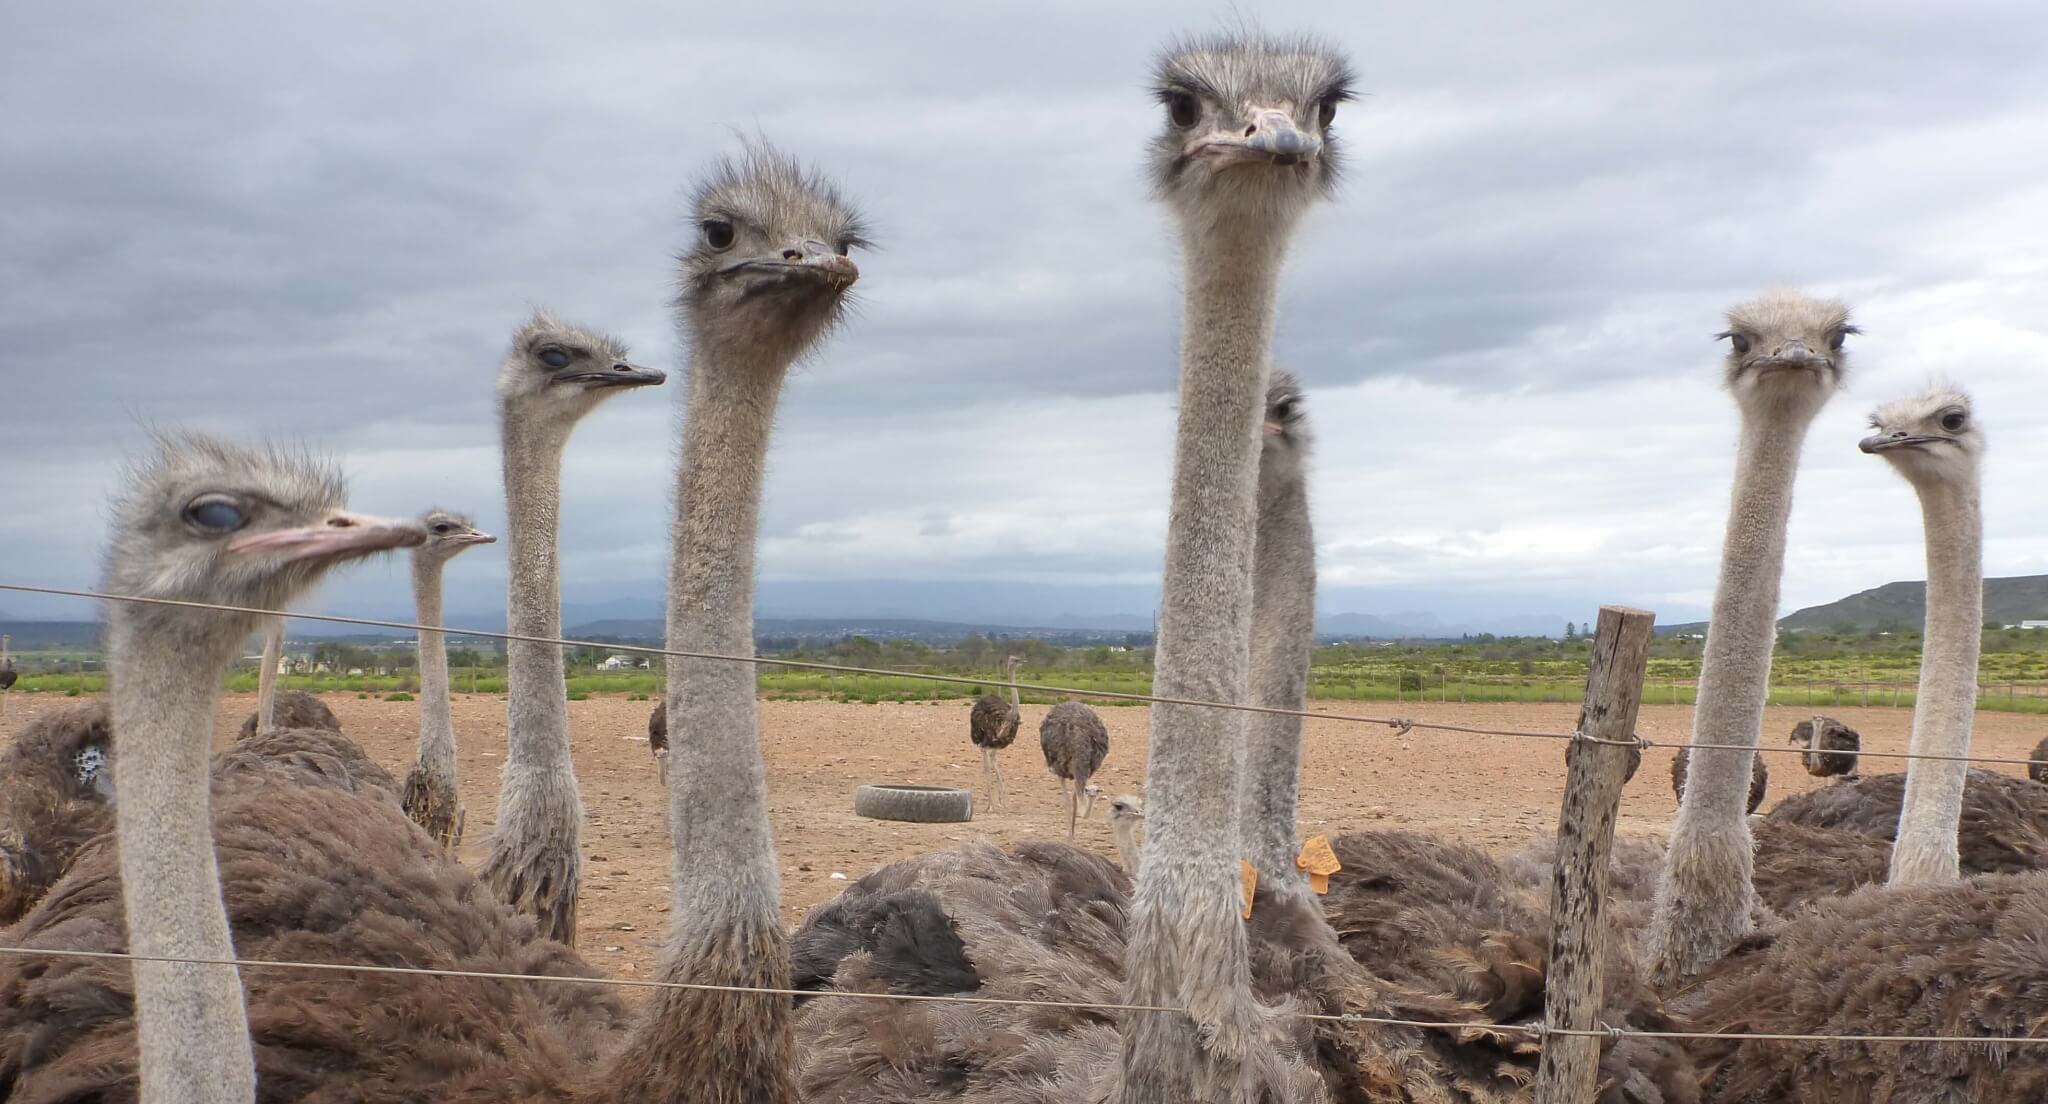 Exposed: Juvenile Ostriches Butchered for Hermès and Prada ‘Luxury’ Bags